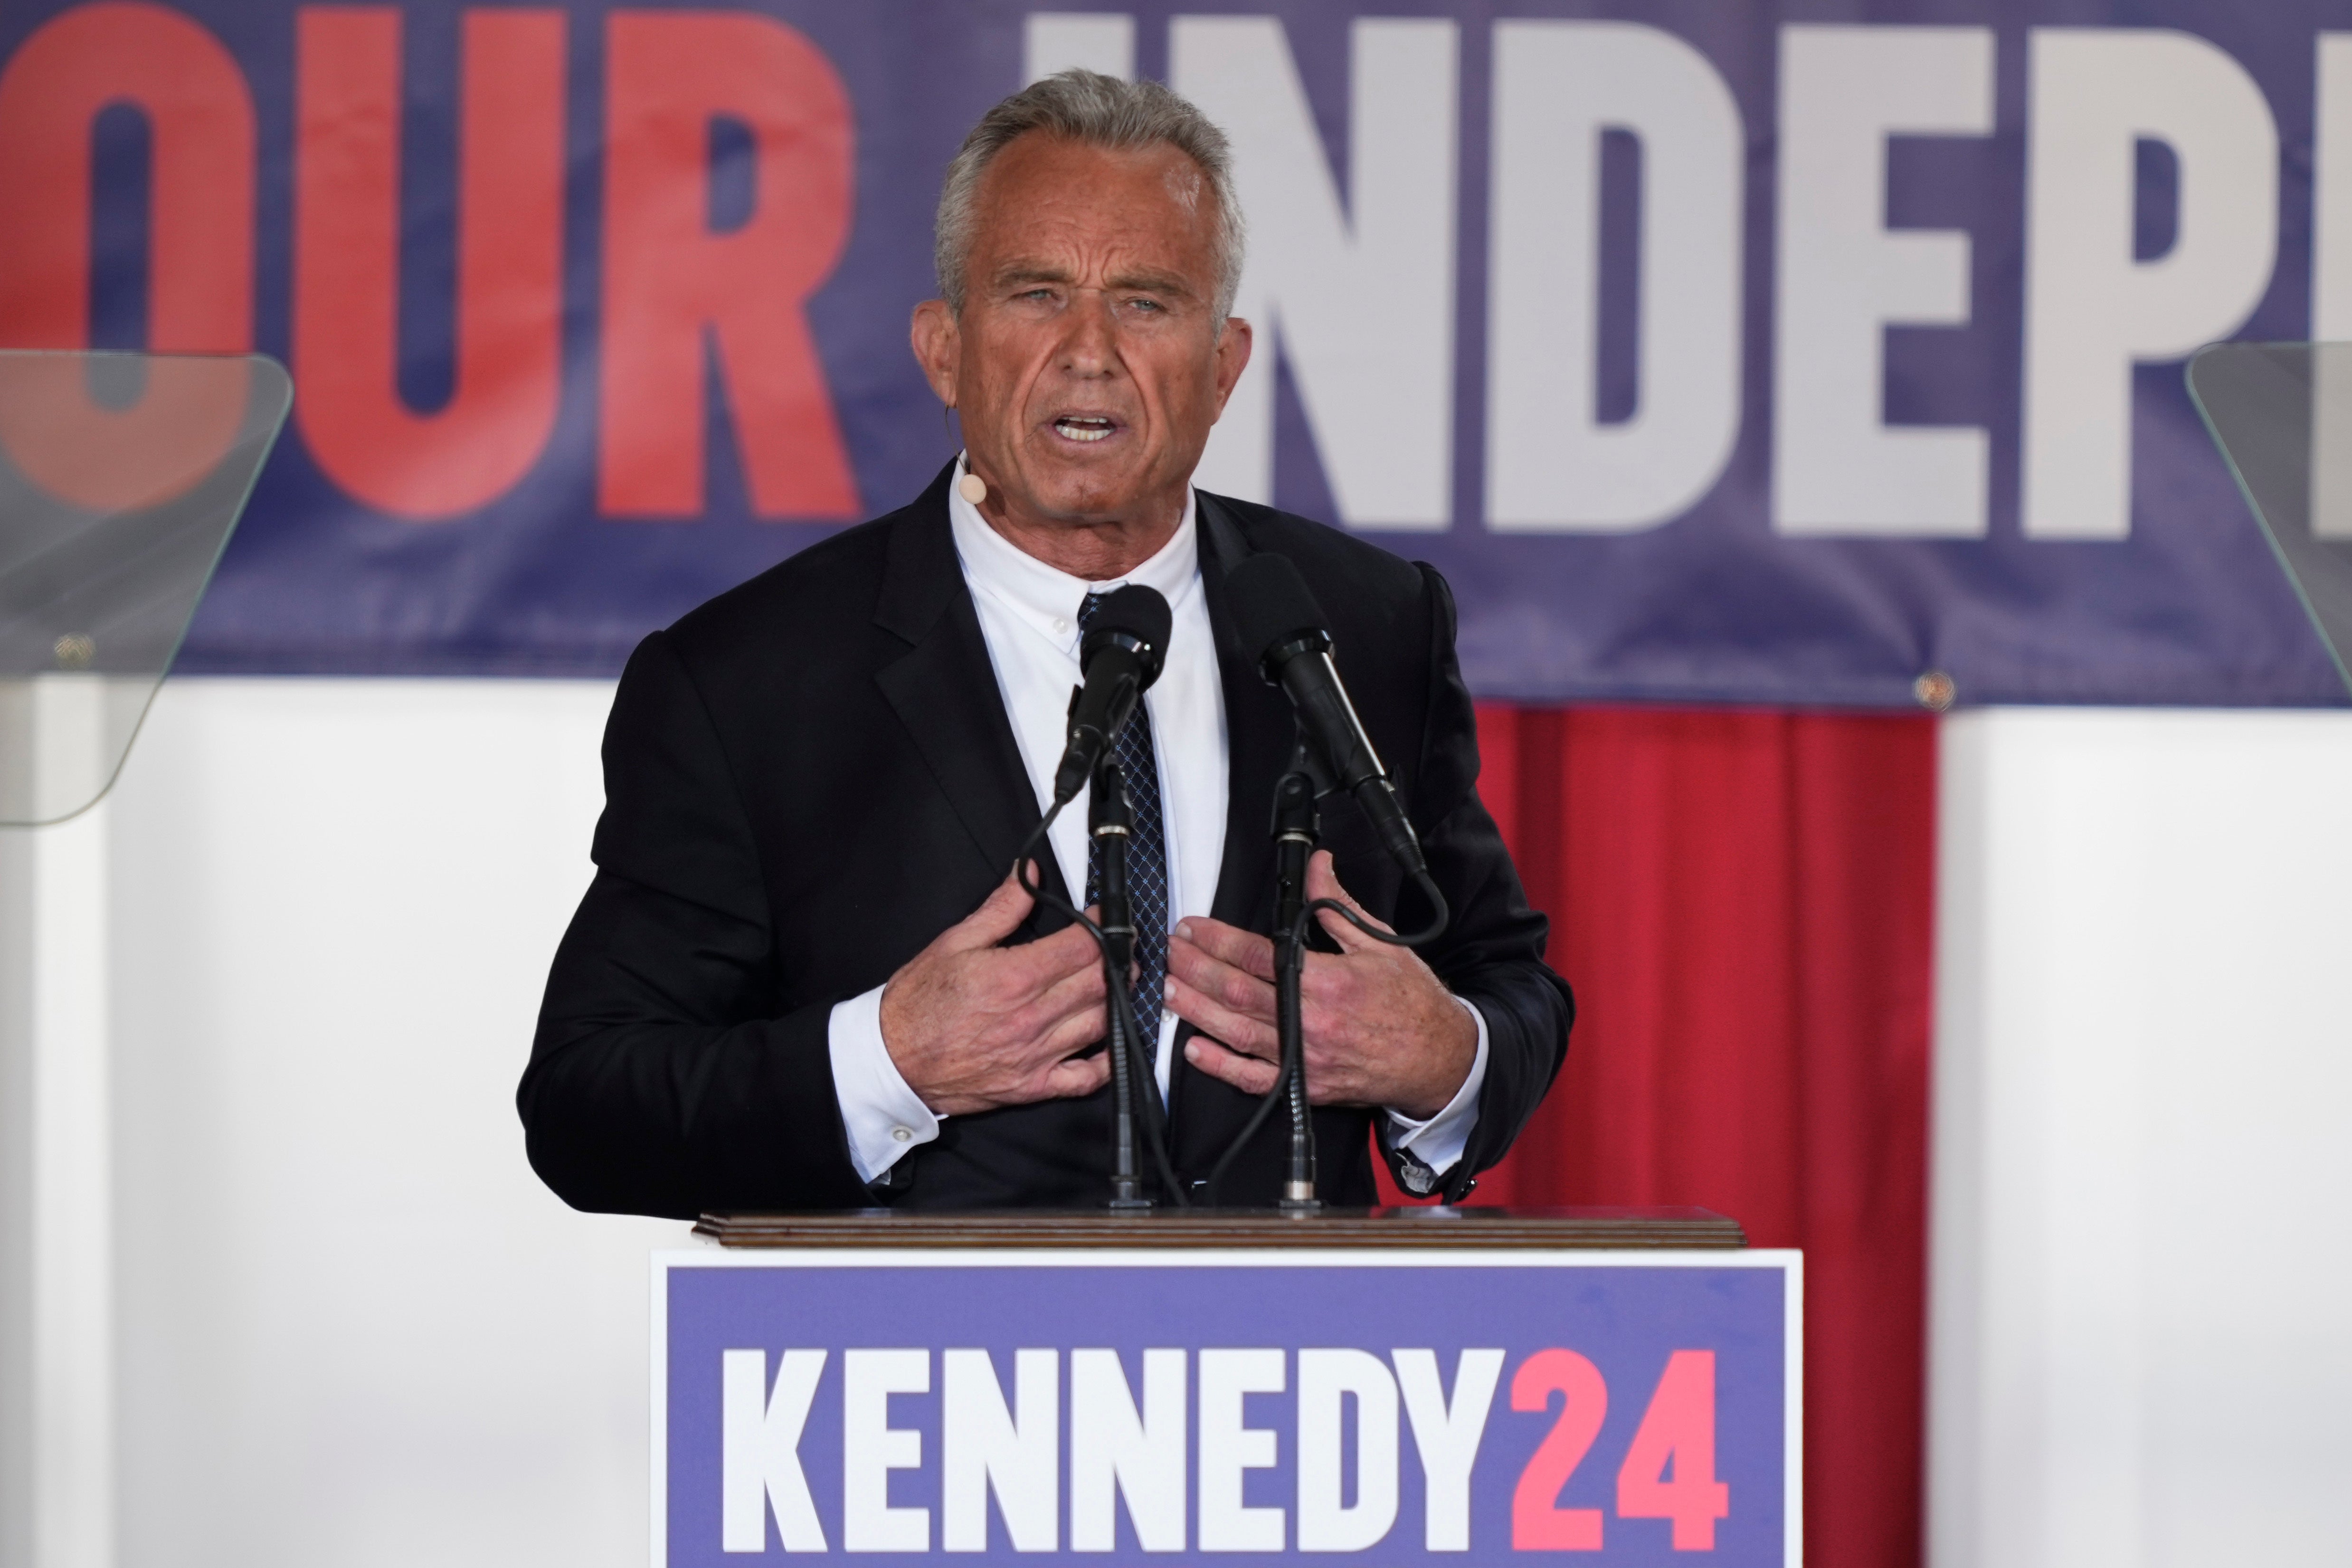 Robert F Kennedy Jr is running as an indepedent candidate in the presidential election